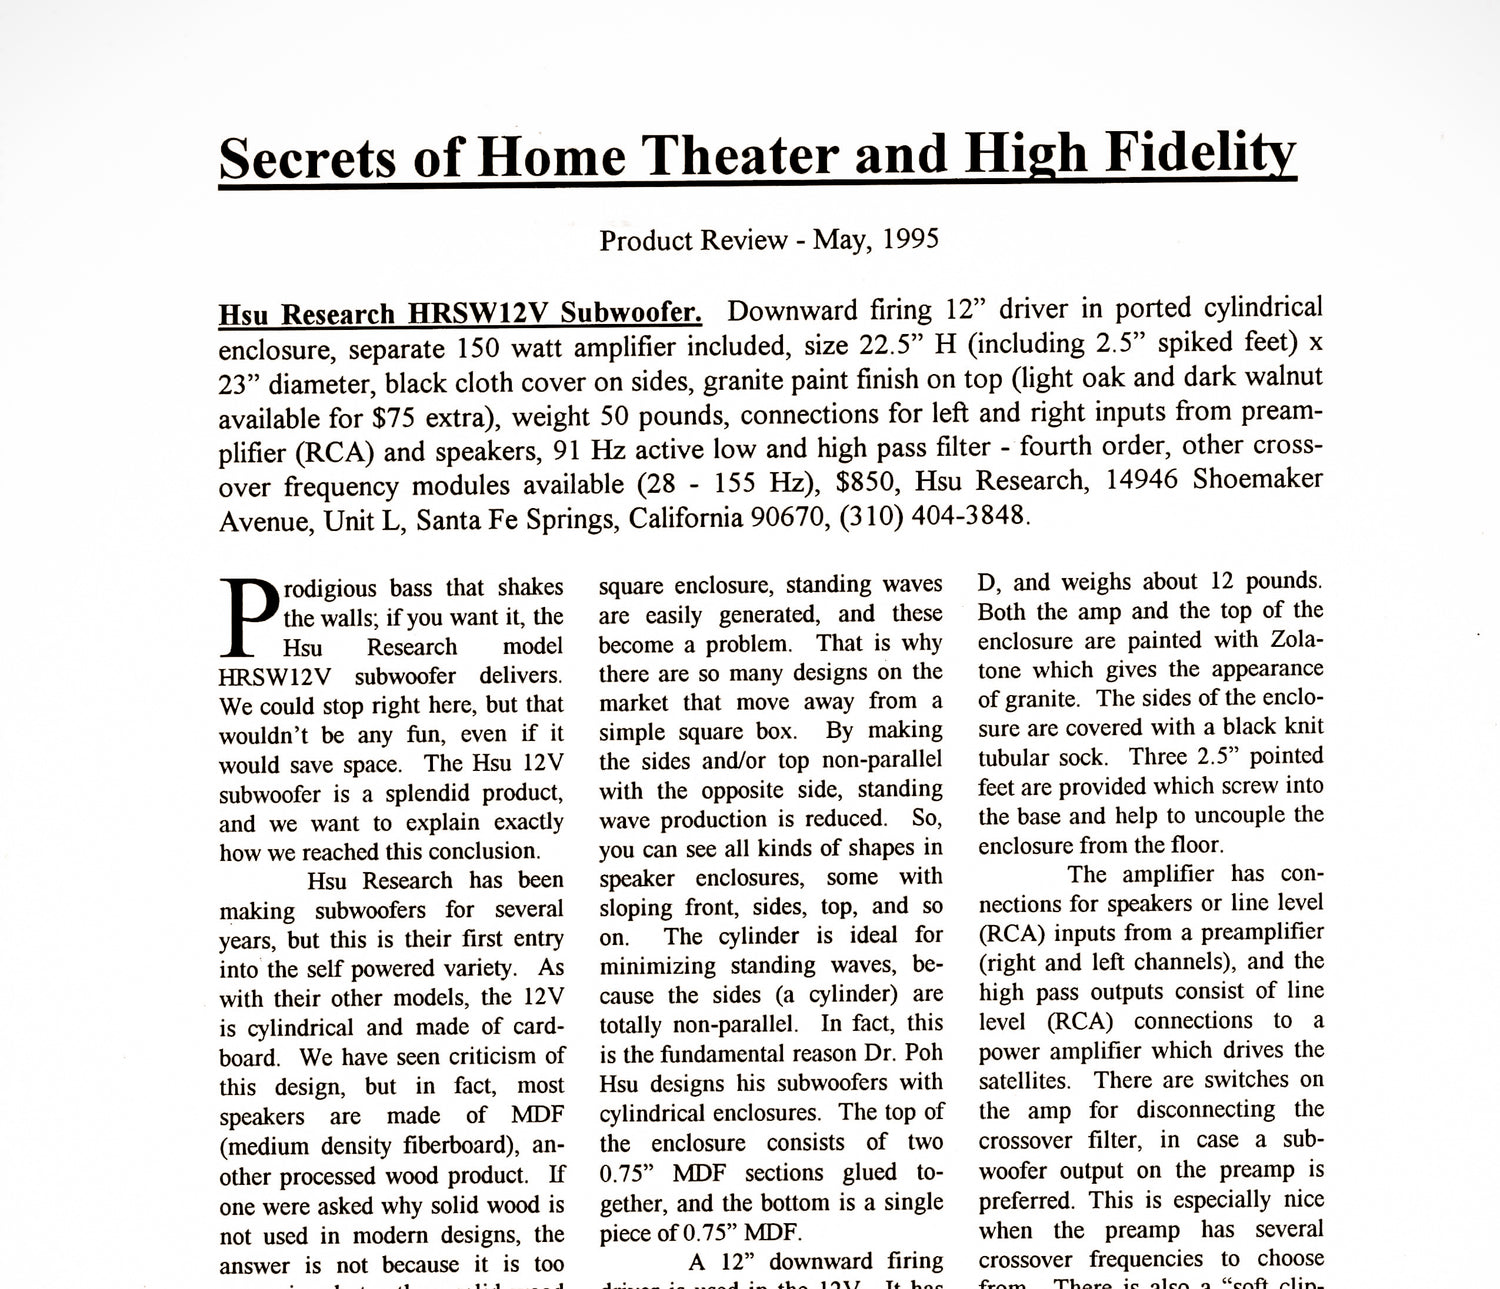 Secrets of Home Theater and High Fidelity 1995: Prodigious Bass That Shakes the Walls